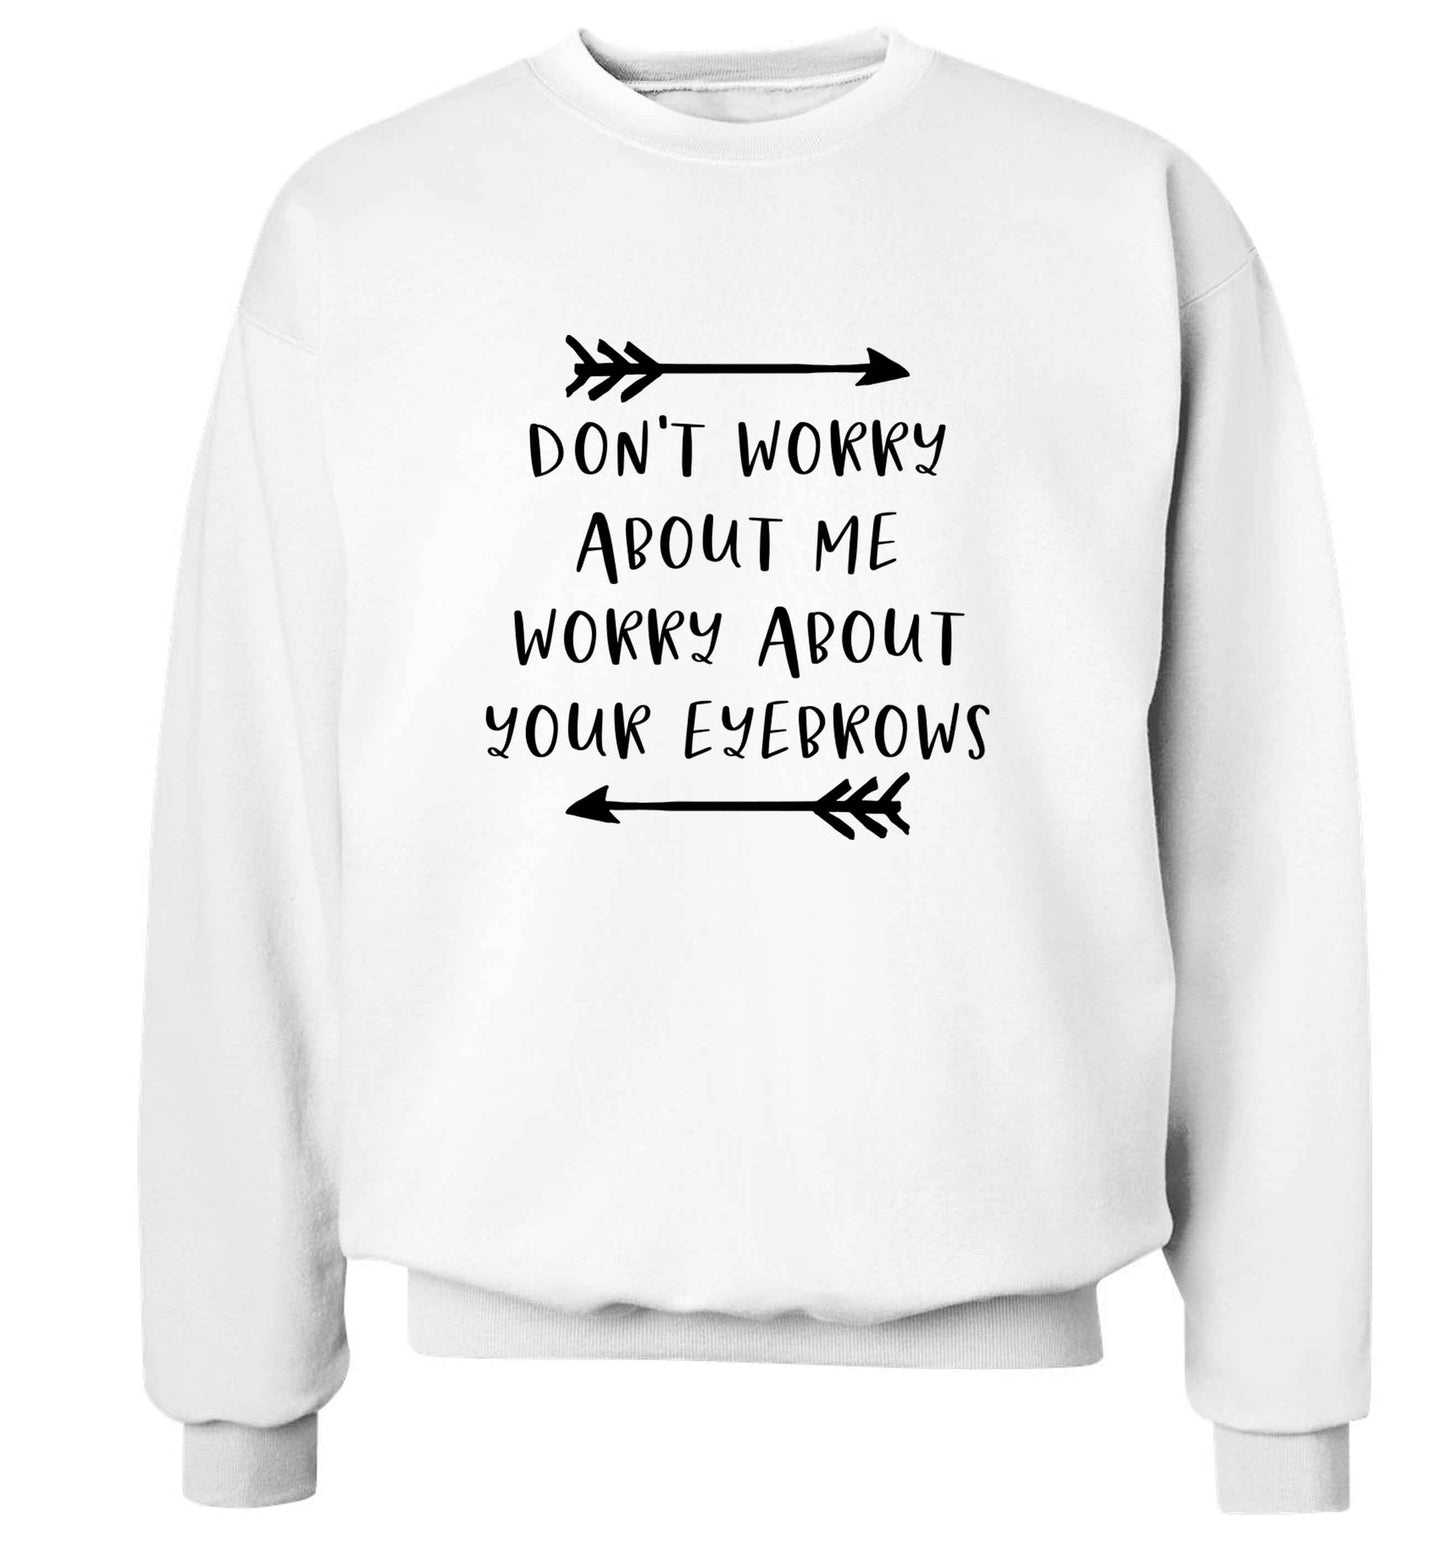 Don't worry about me worry about your eyebrows adult's unisex white sweater 2XL